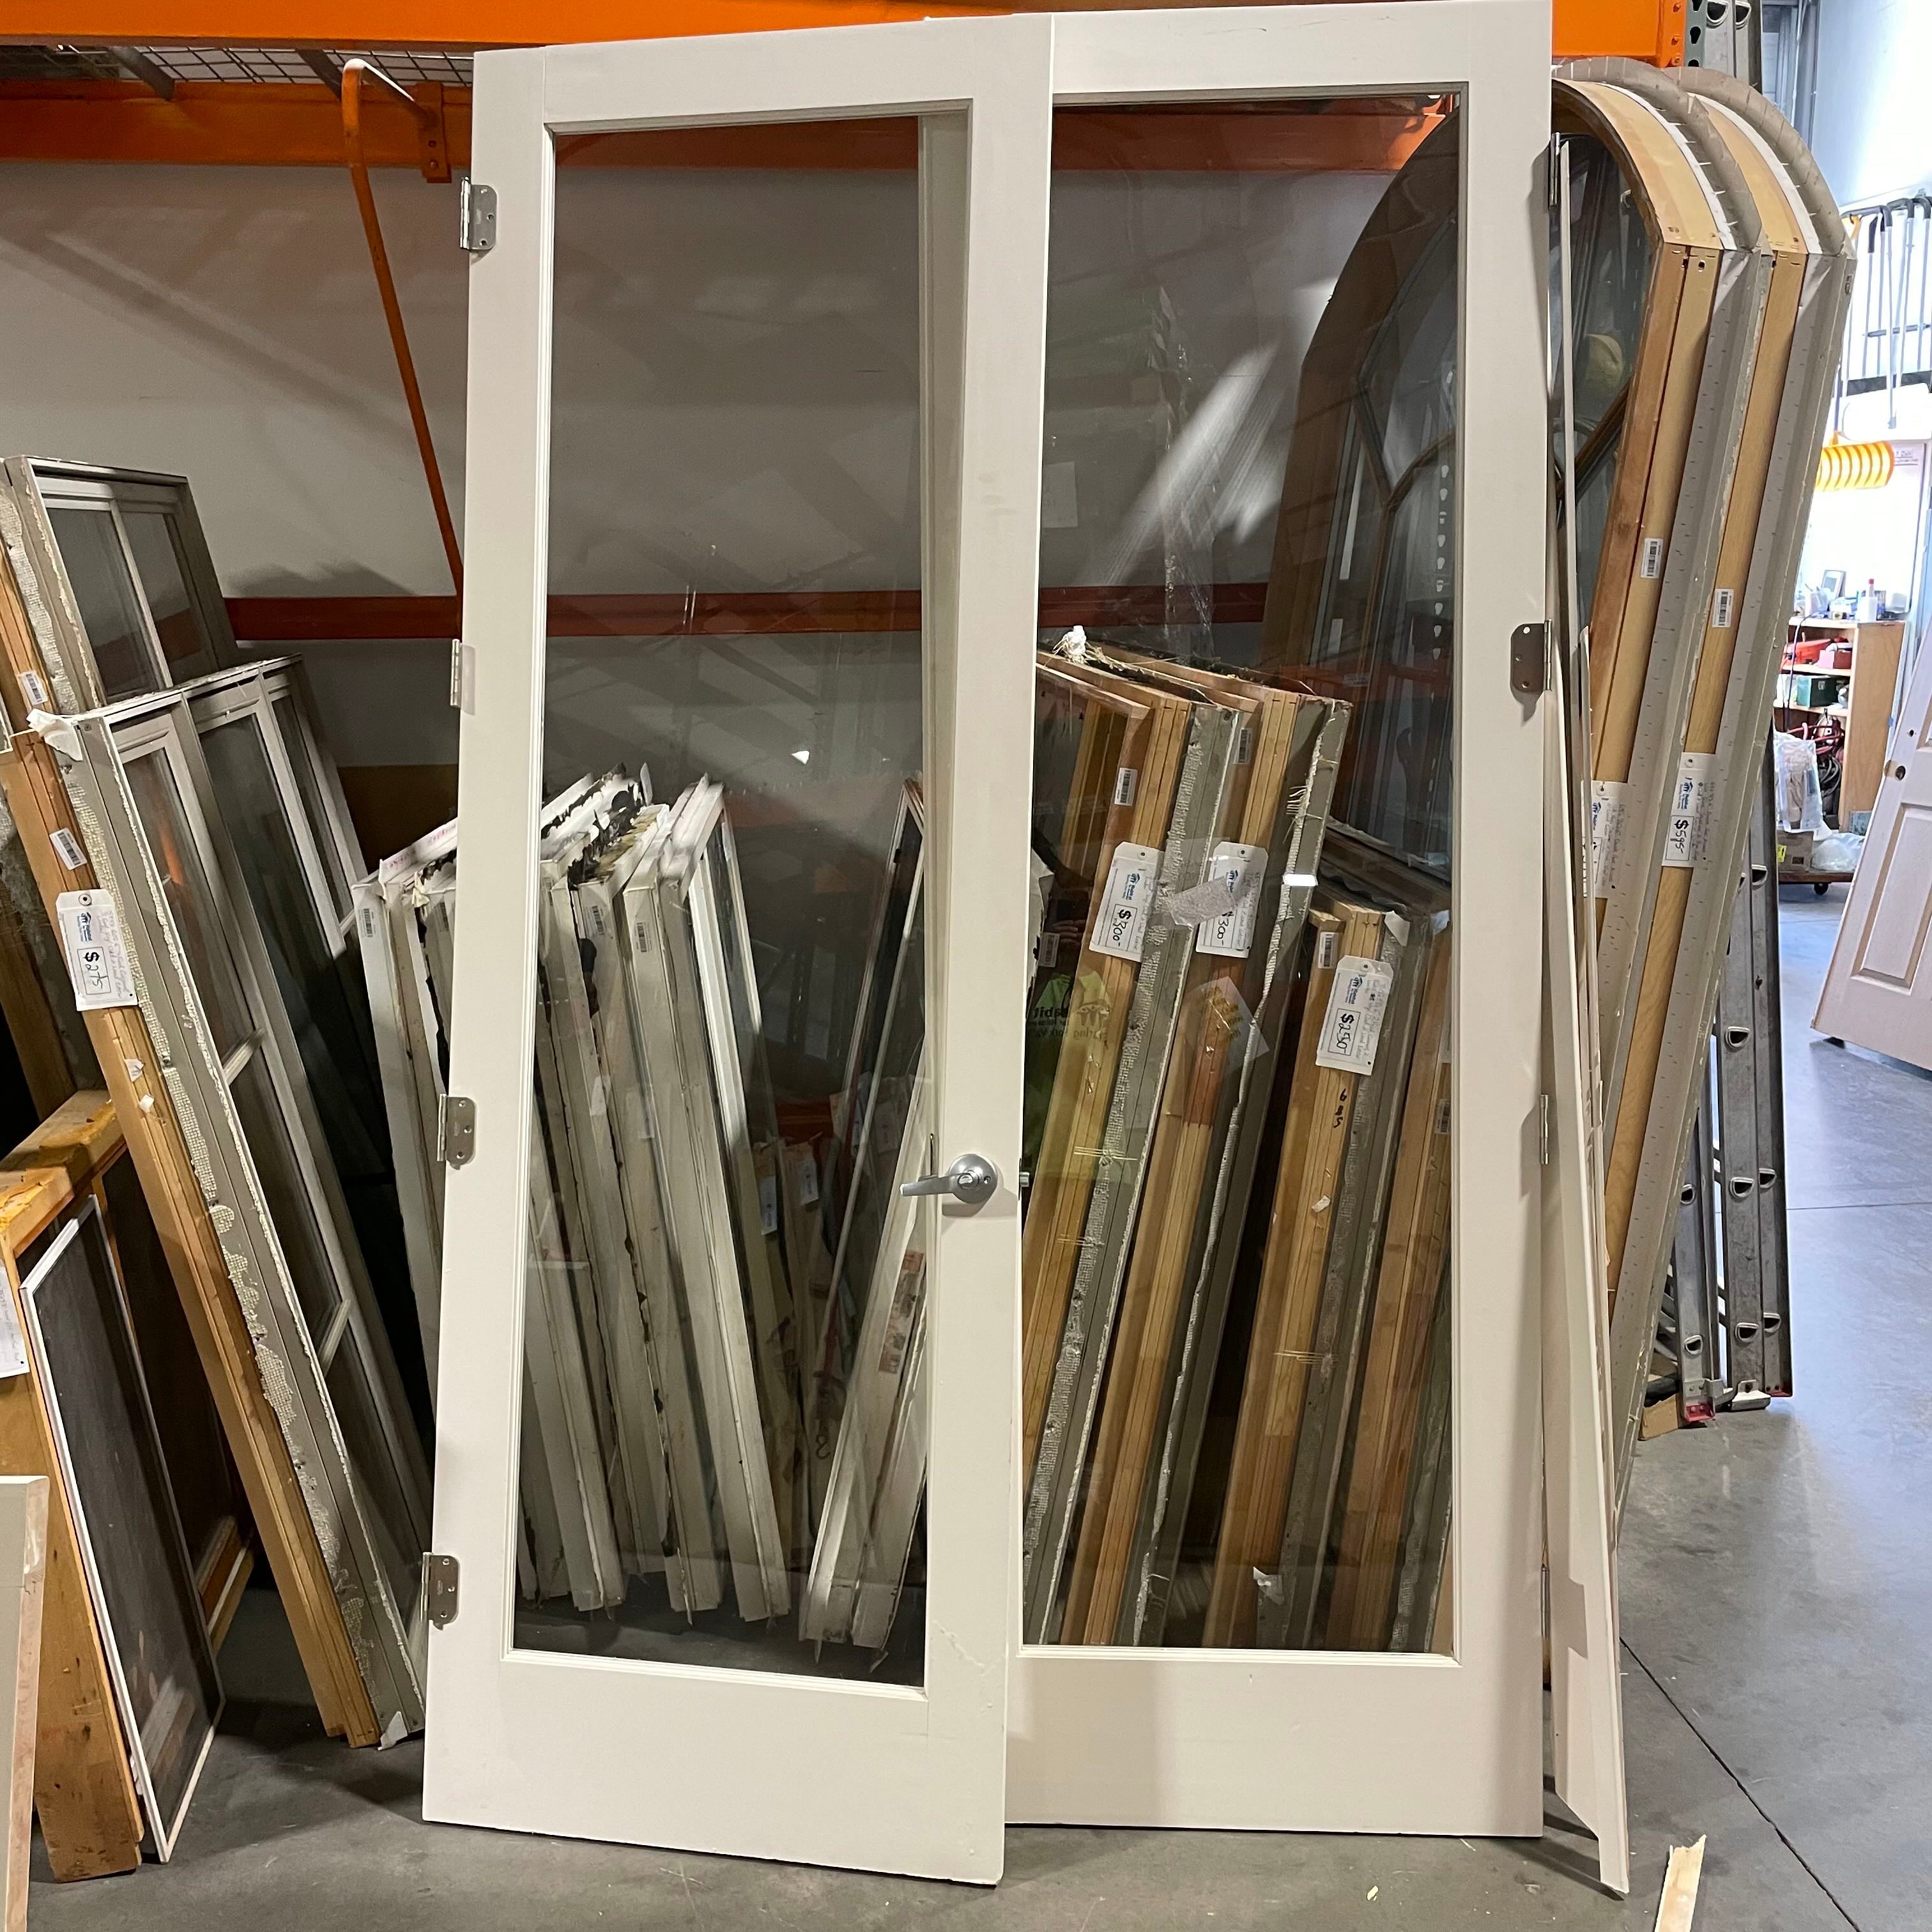 64.25"x 96"x 1.25" Single Glass Panel Painted White Wood Interior French Doors